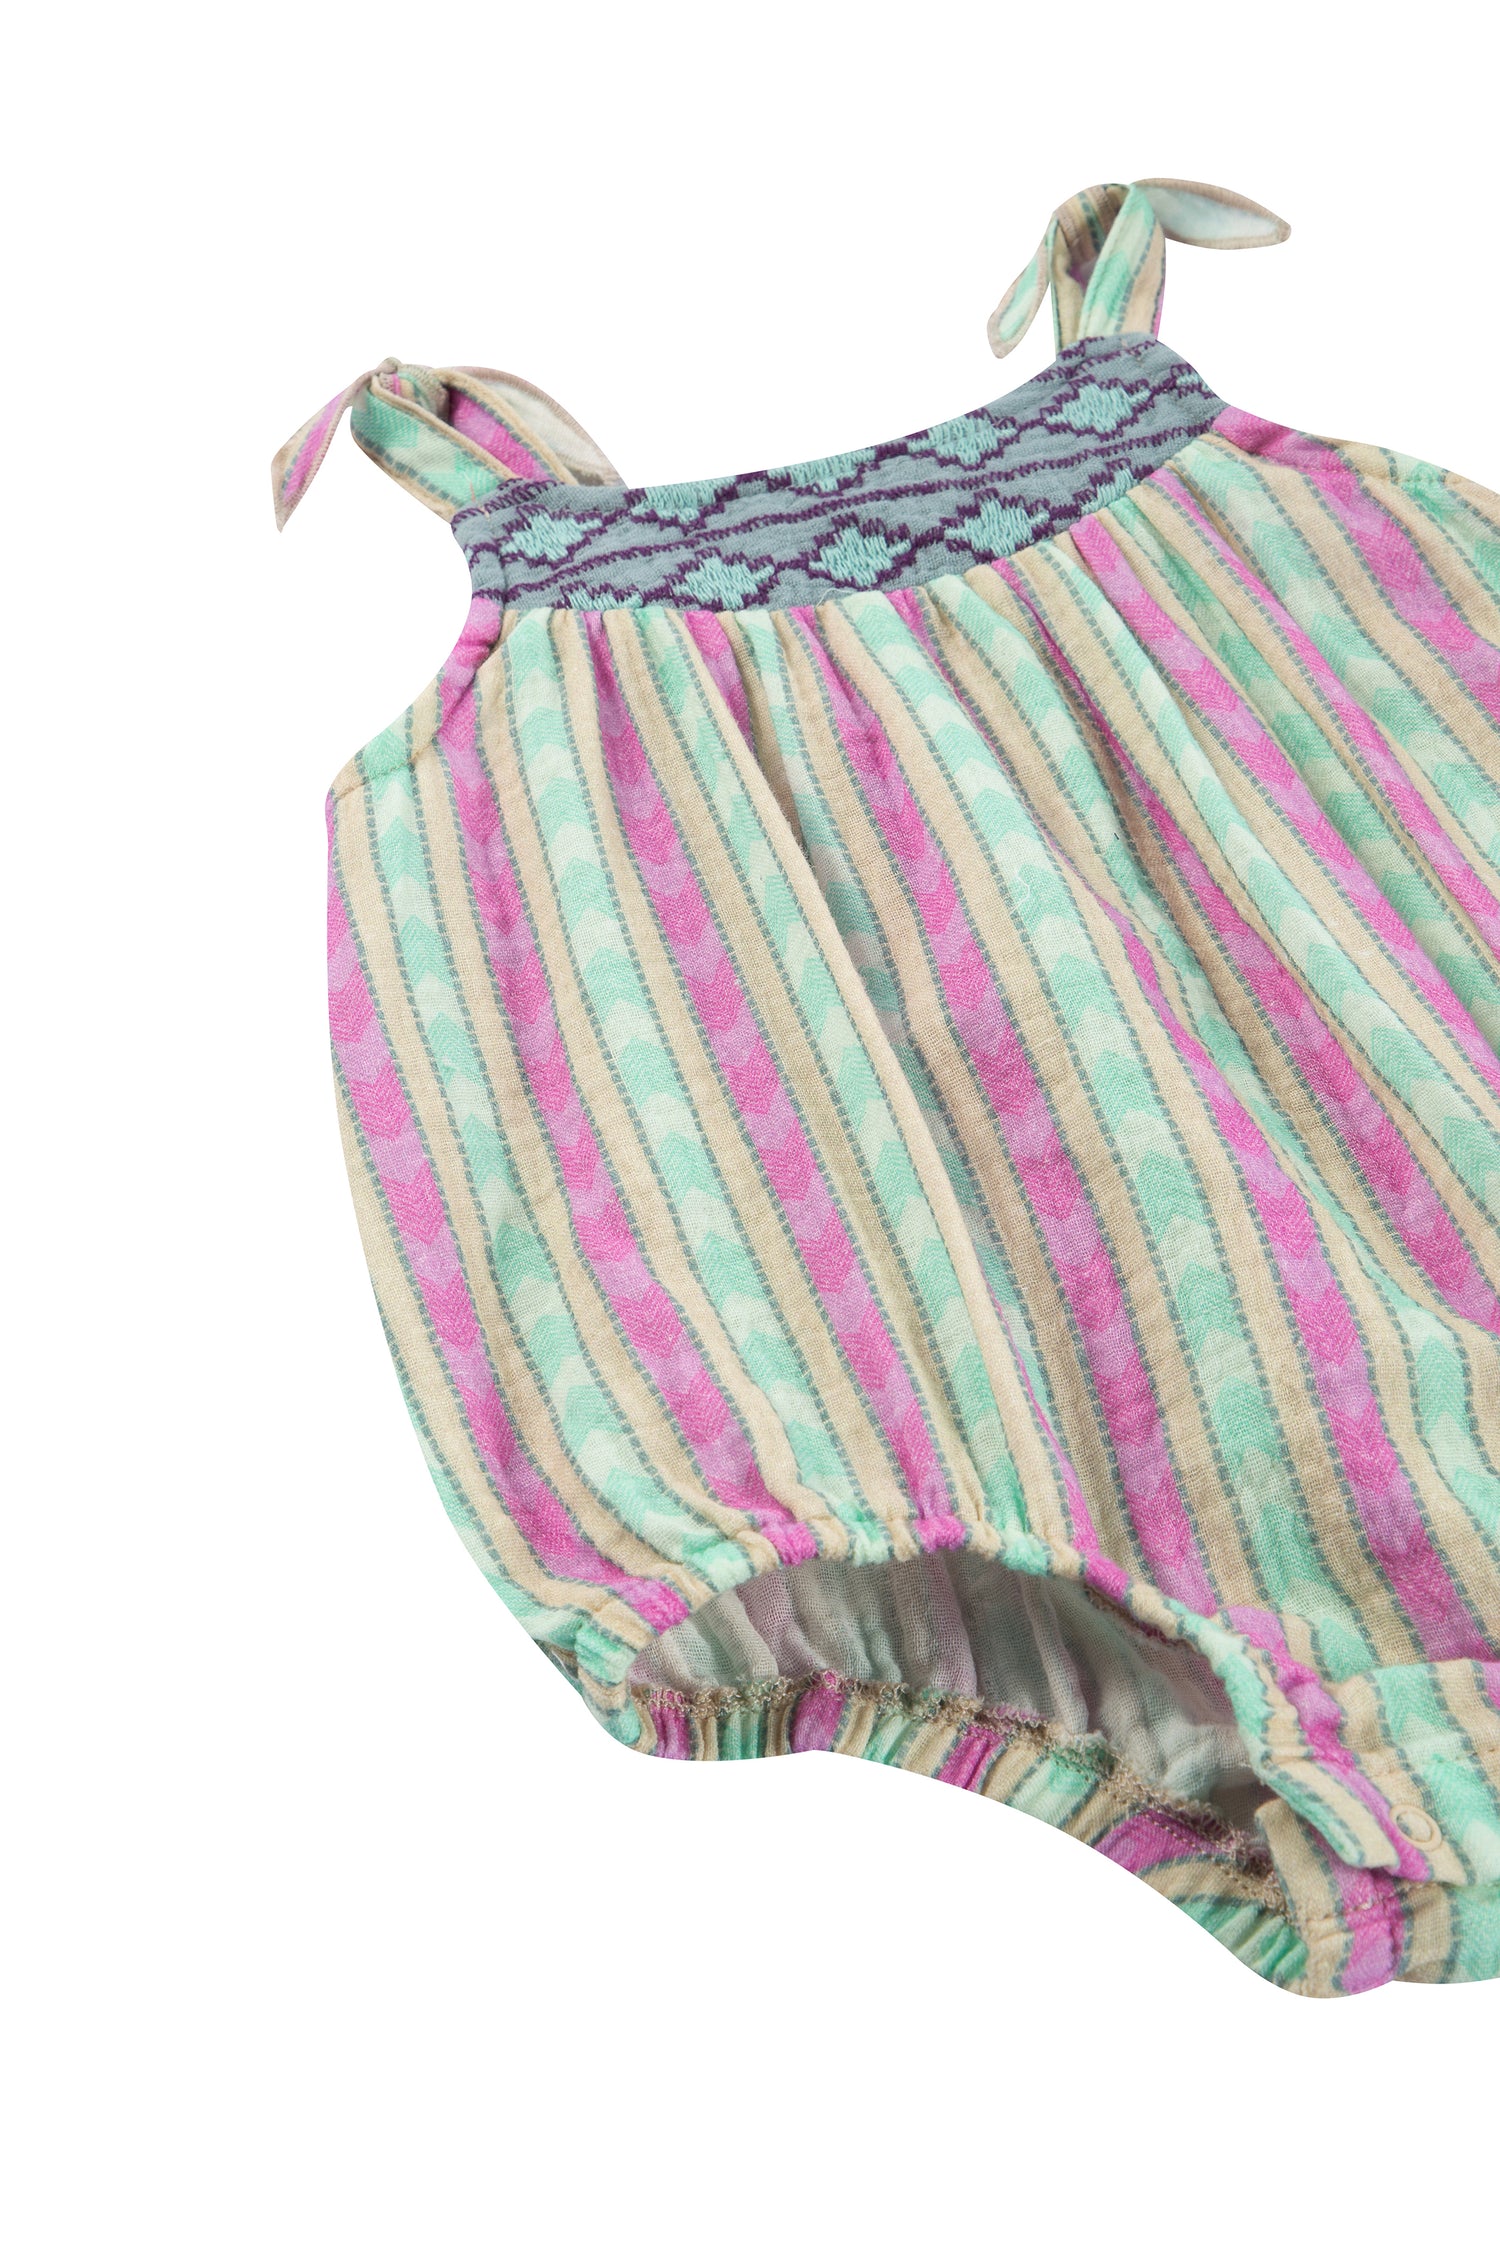 CLOSE UP OF GREEN AND PINK STRIPED GAUZE BUBBLE ROMPER